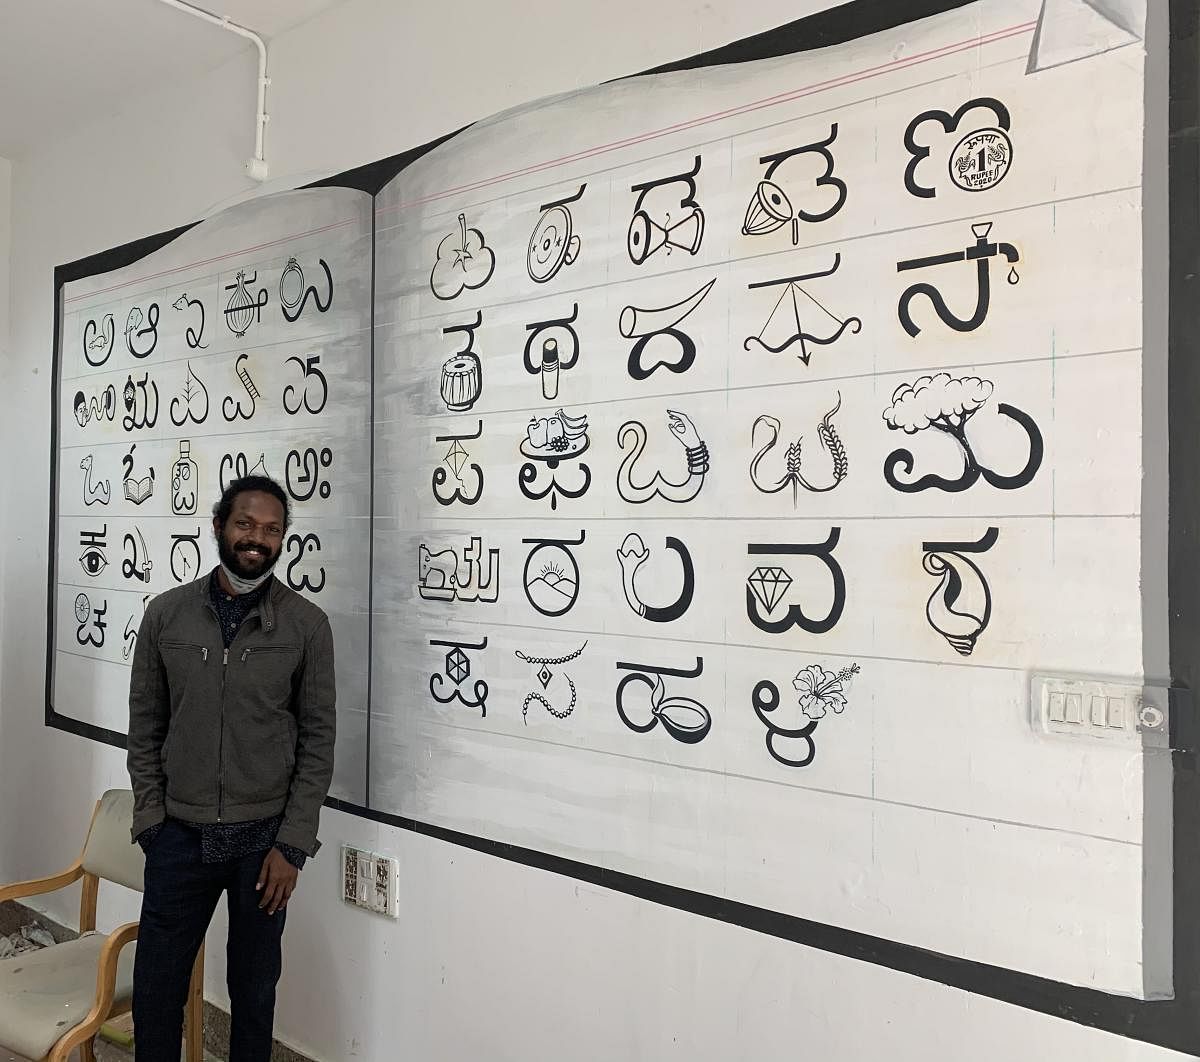 Baadal Nanjundaswamy created art with Kannada alphabets by drawing animals, easy-to-identify home objects and numbers into them.